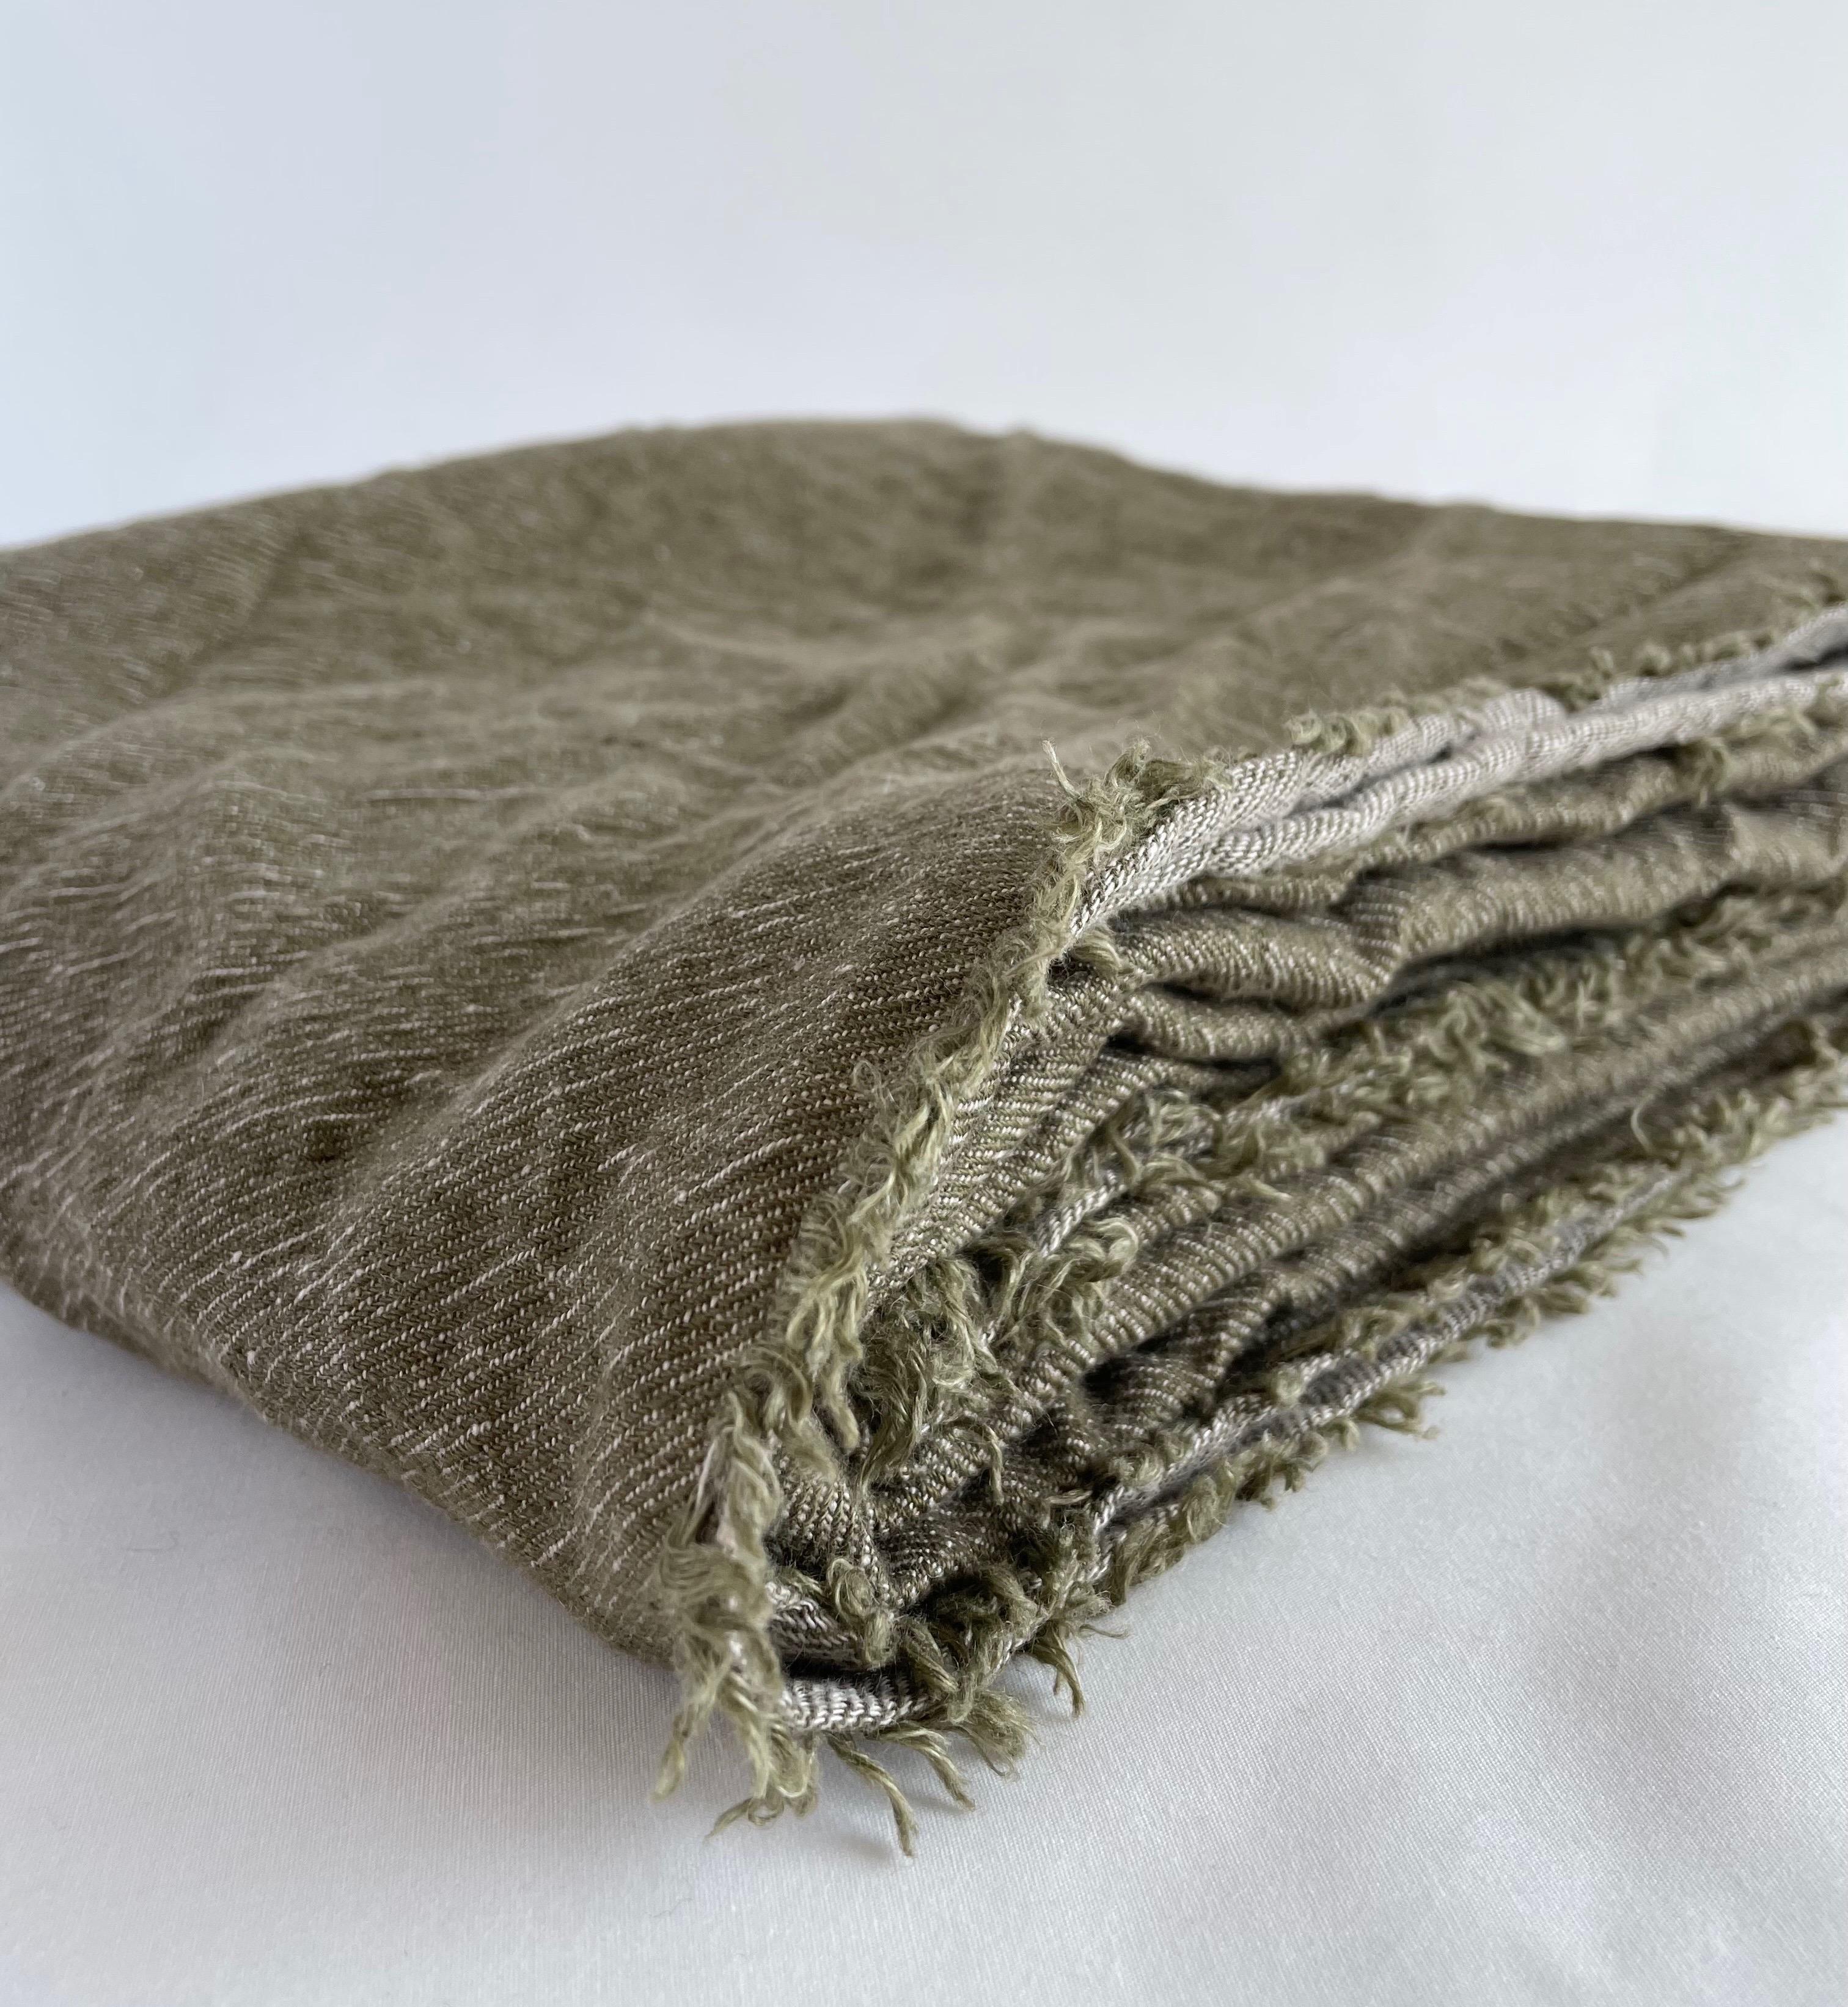 Layer your sofa or bed with this washed Belgian linen throw imported from Paris, France. In the colour Kaki-Givre, which is an olive or army green color with a deeper color on one side, and lighter on the opposite. The decorative frayed edge give